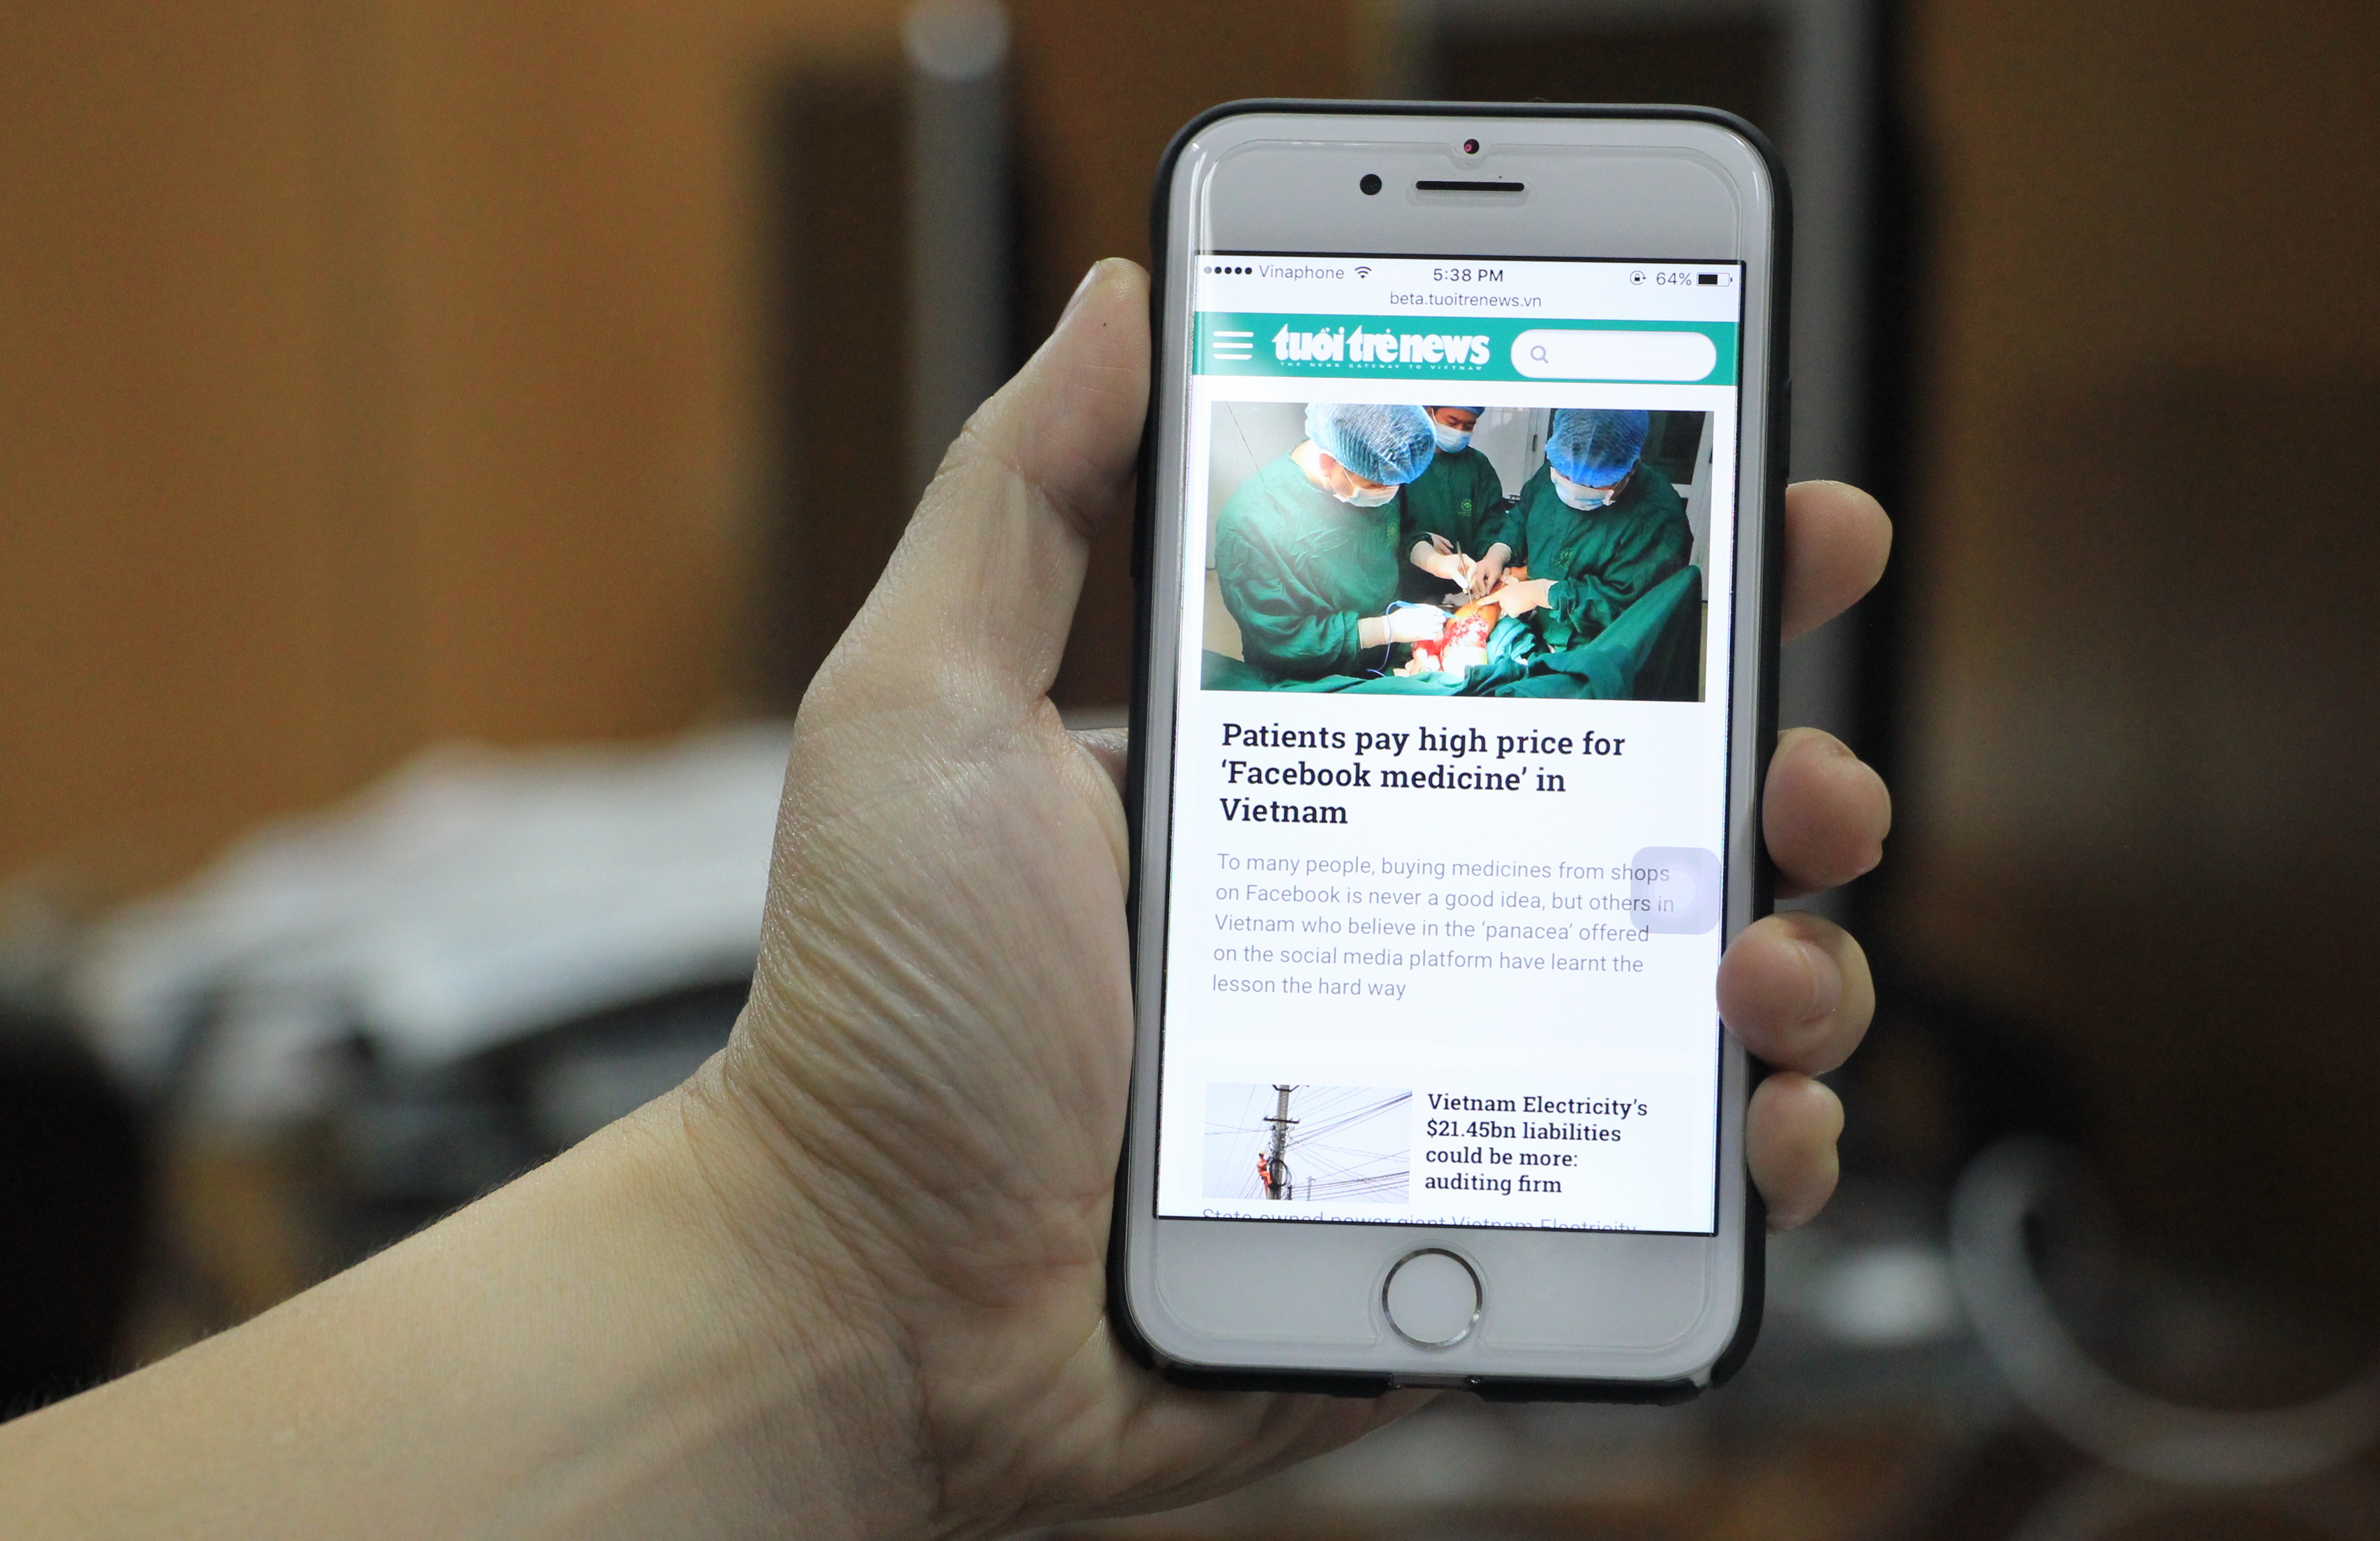 Tuoi Tre News to get facelift, go mobile in August